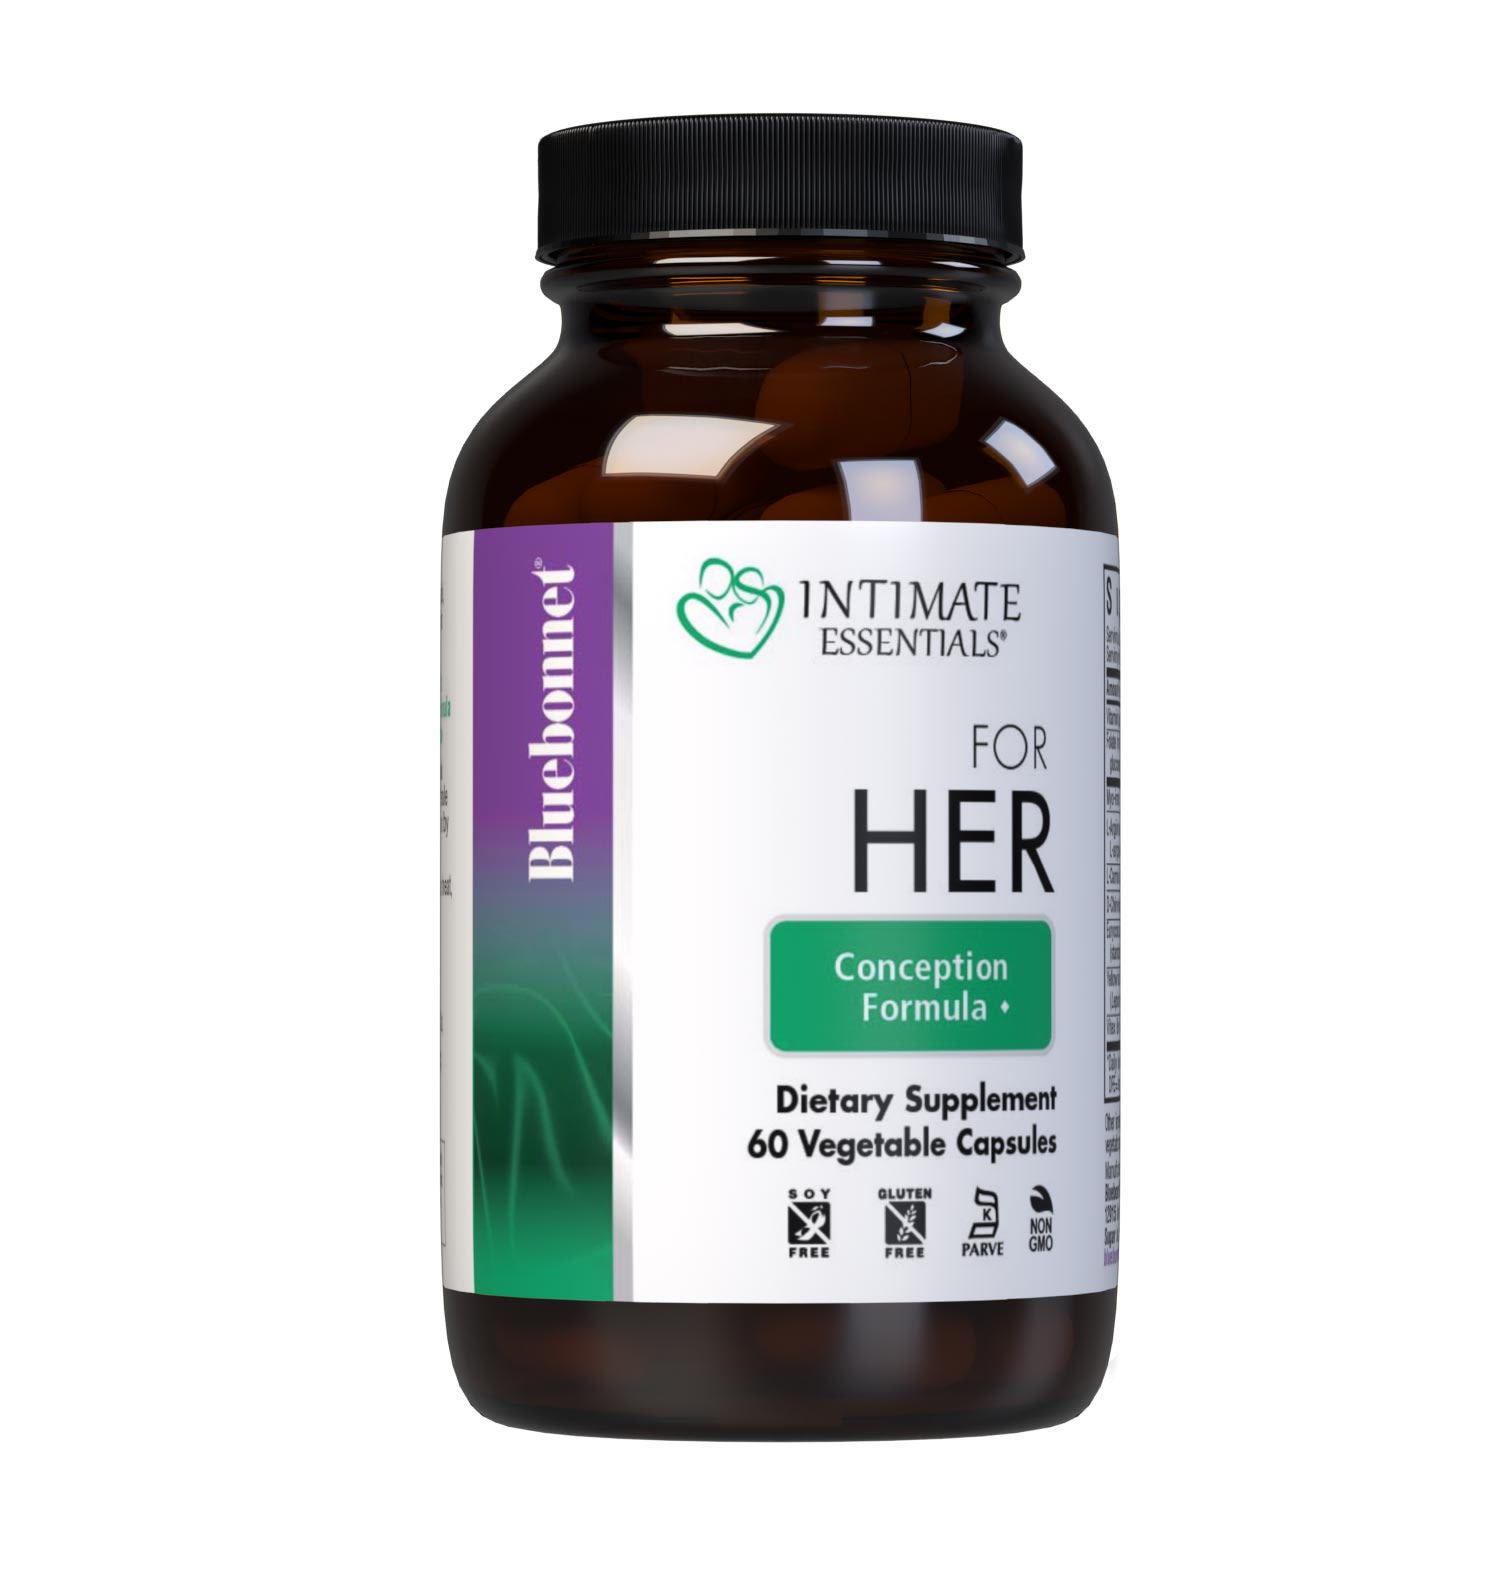 INTIMATE ESSENTIALS CONCEPTION FORMULA FOR Her, 60 Vegetable capsules, Daily Nutrition for: Fertility support, Balance hormone levels, Support ovulation and egg quality #size_60 count